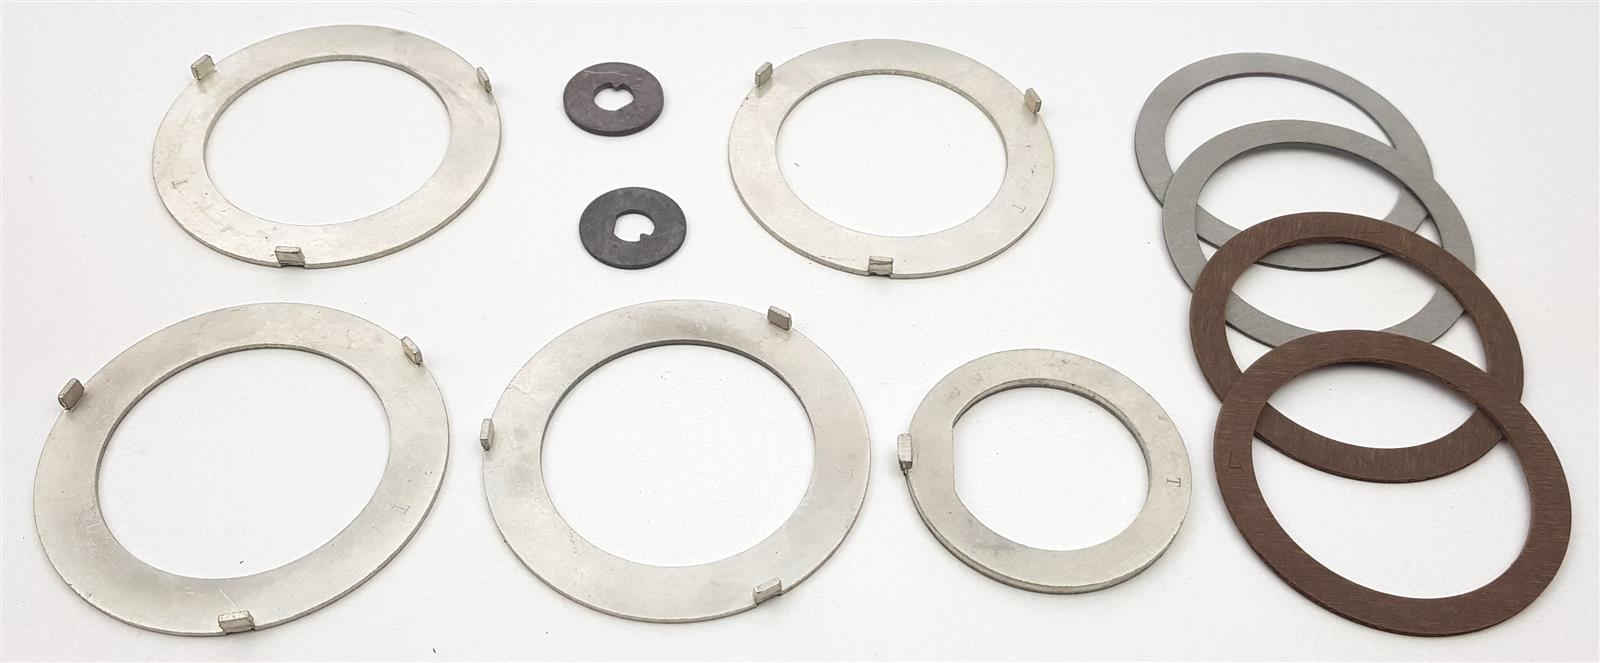 A904 TF6 Washer Kit 60-77